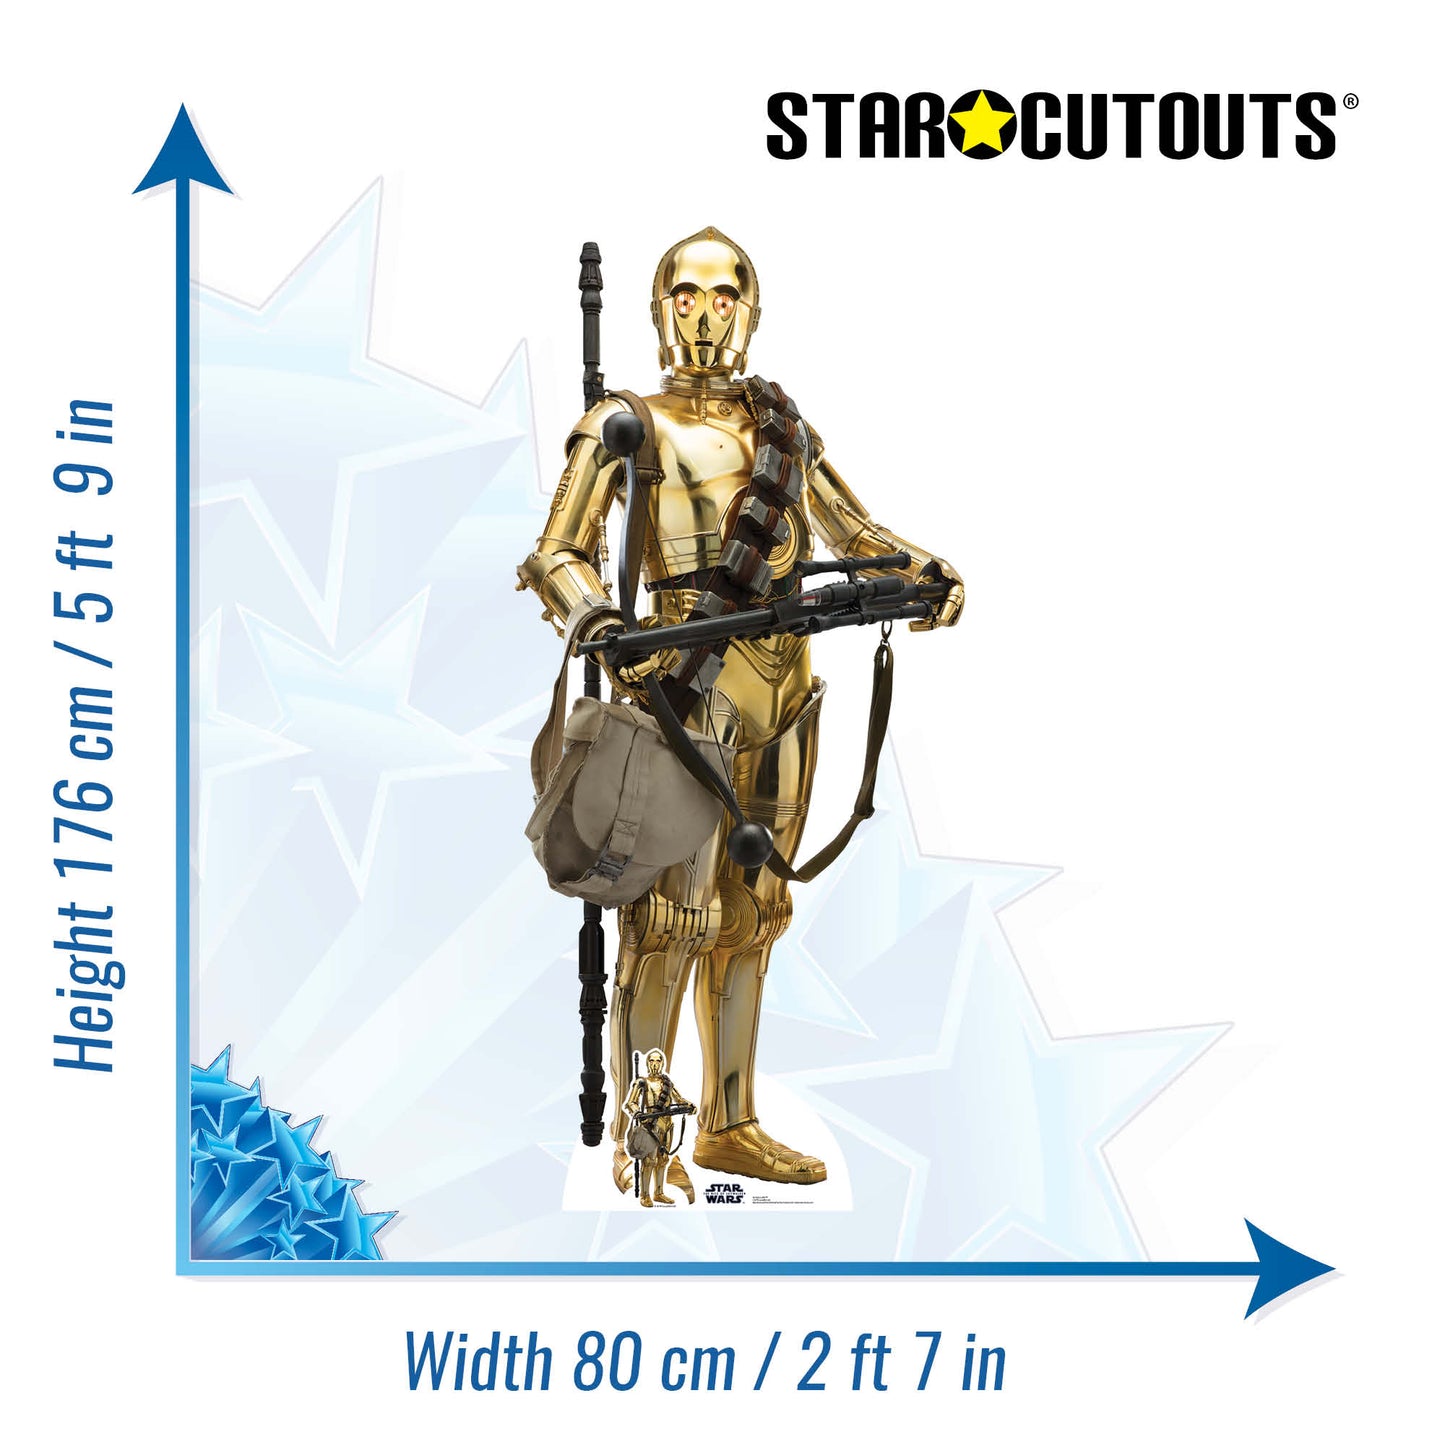 Star Wars C3PO The Rise of Skywalker Cardboard Cut Out Height 176cm